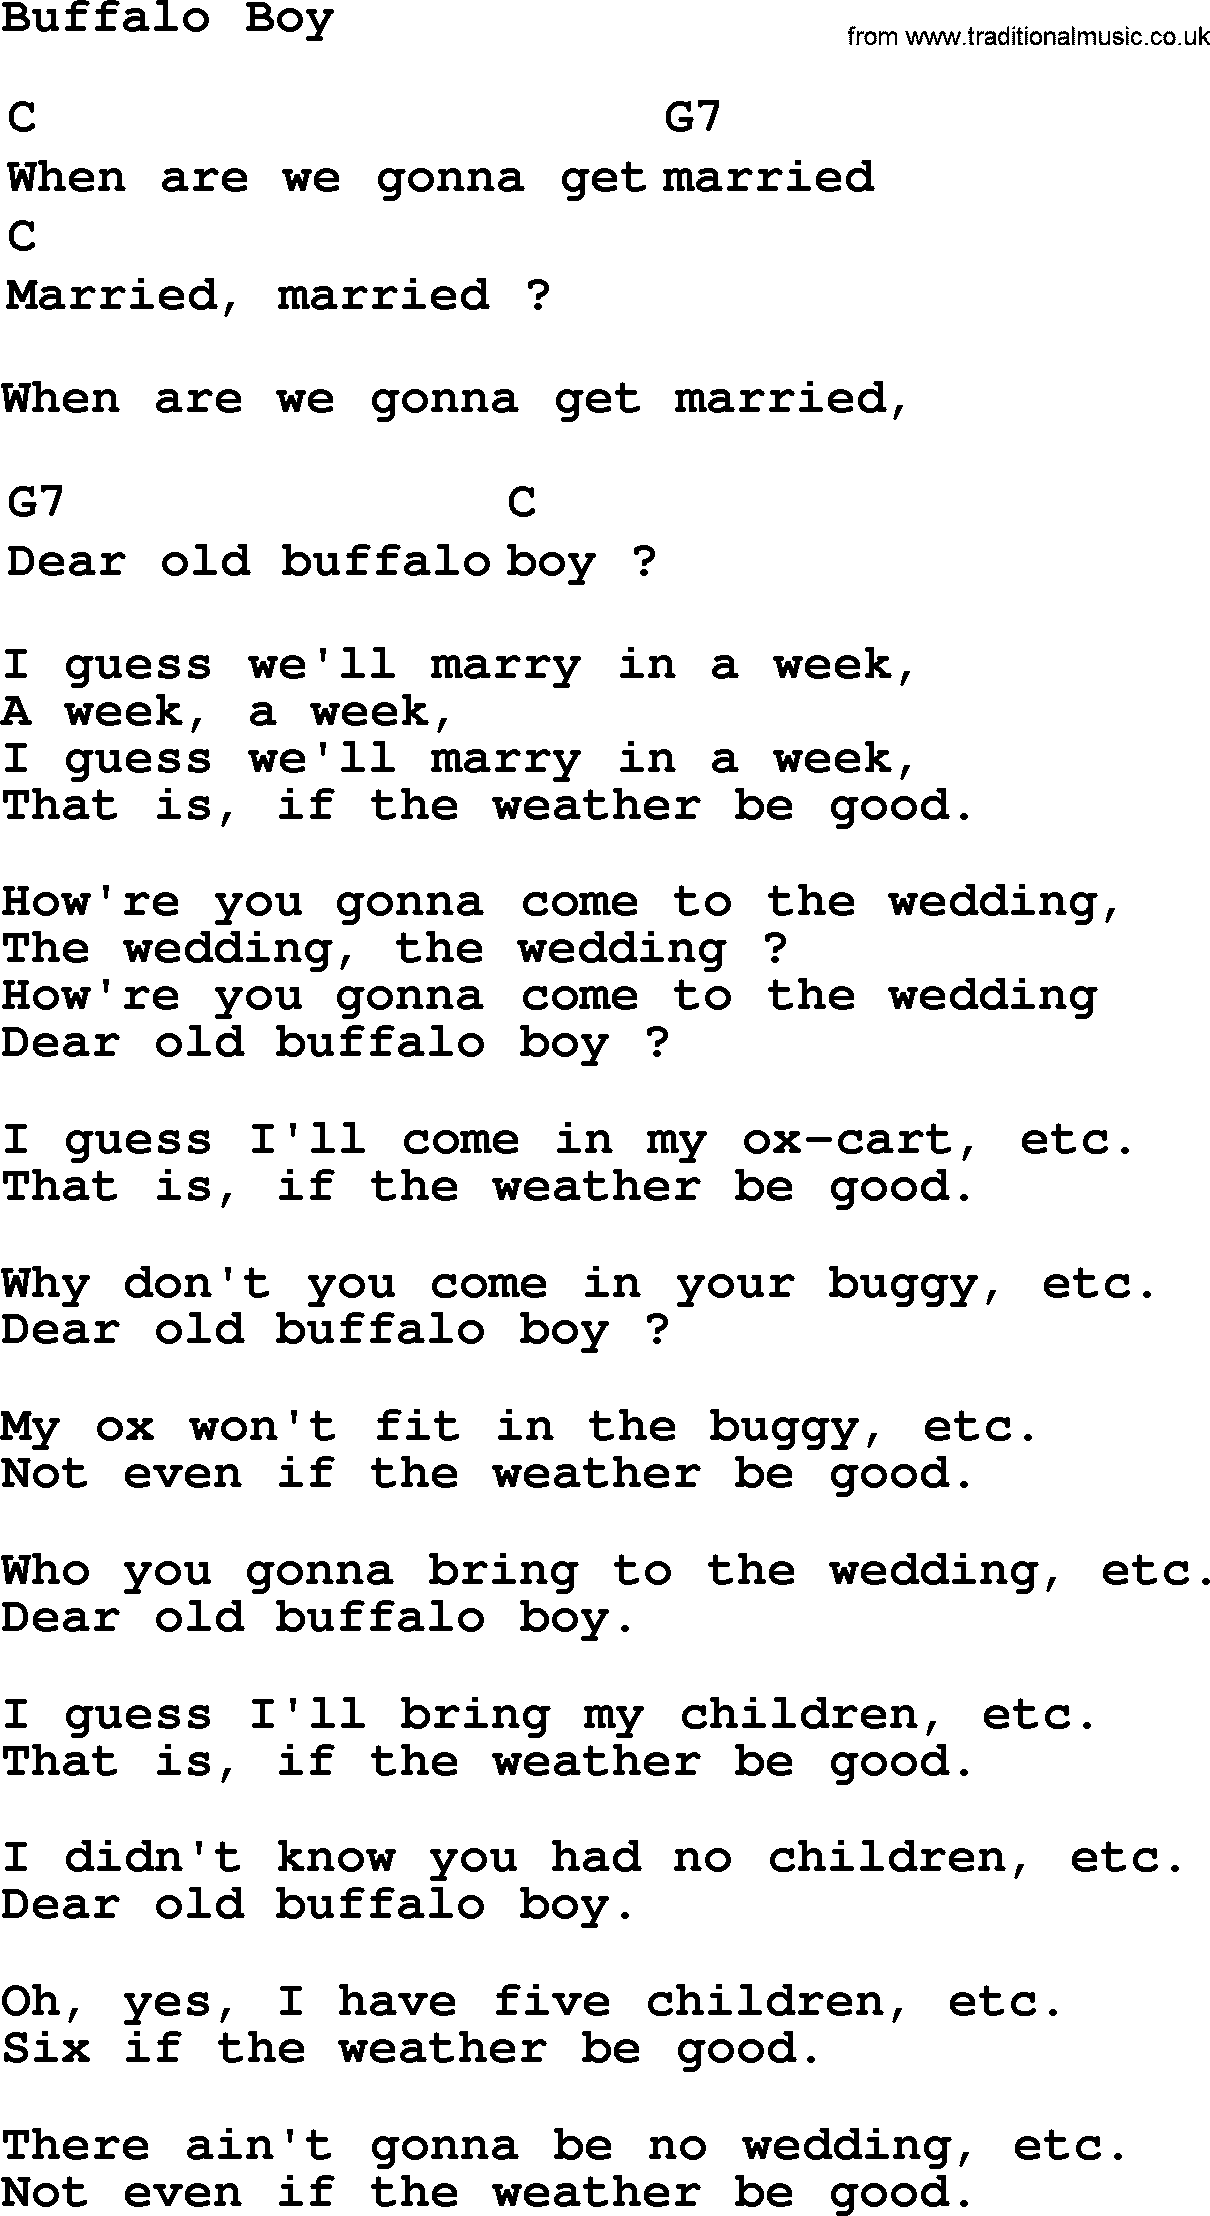 Top 1000 Folk and Old Time Songs Collection: Buffalo Boy - Lyrics with and PDF